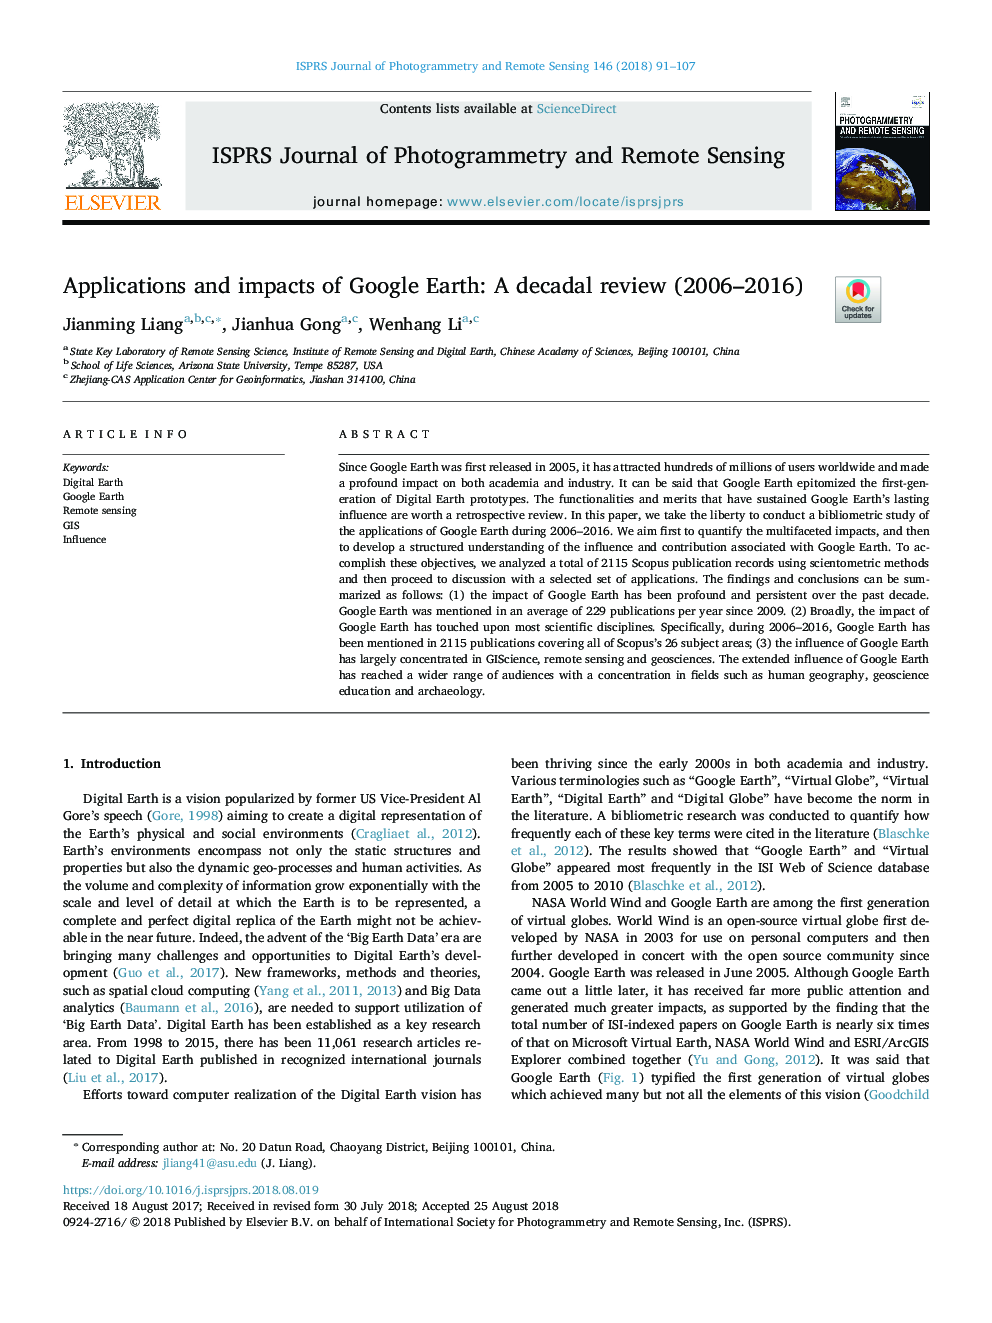 Applications and impacts of Google Earth: A decadal review (2006-2016)